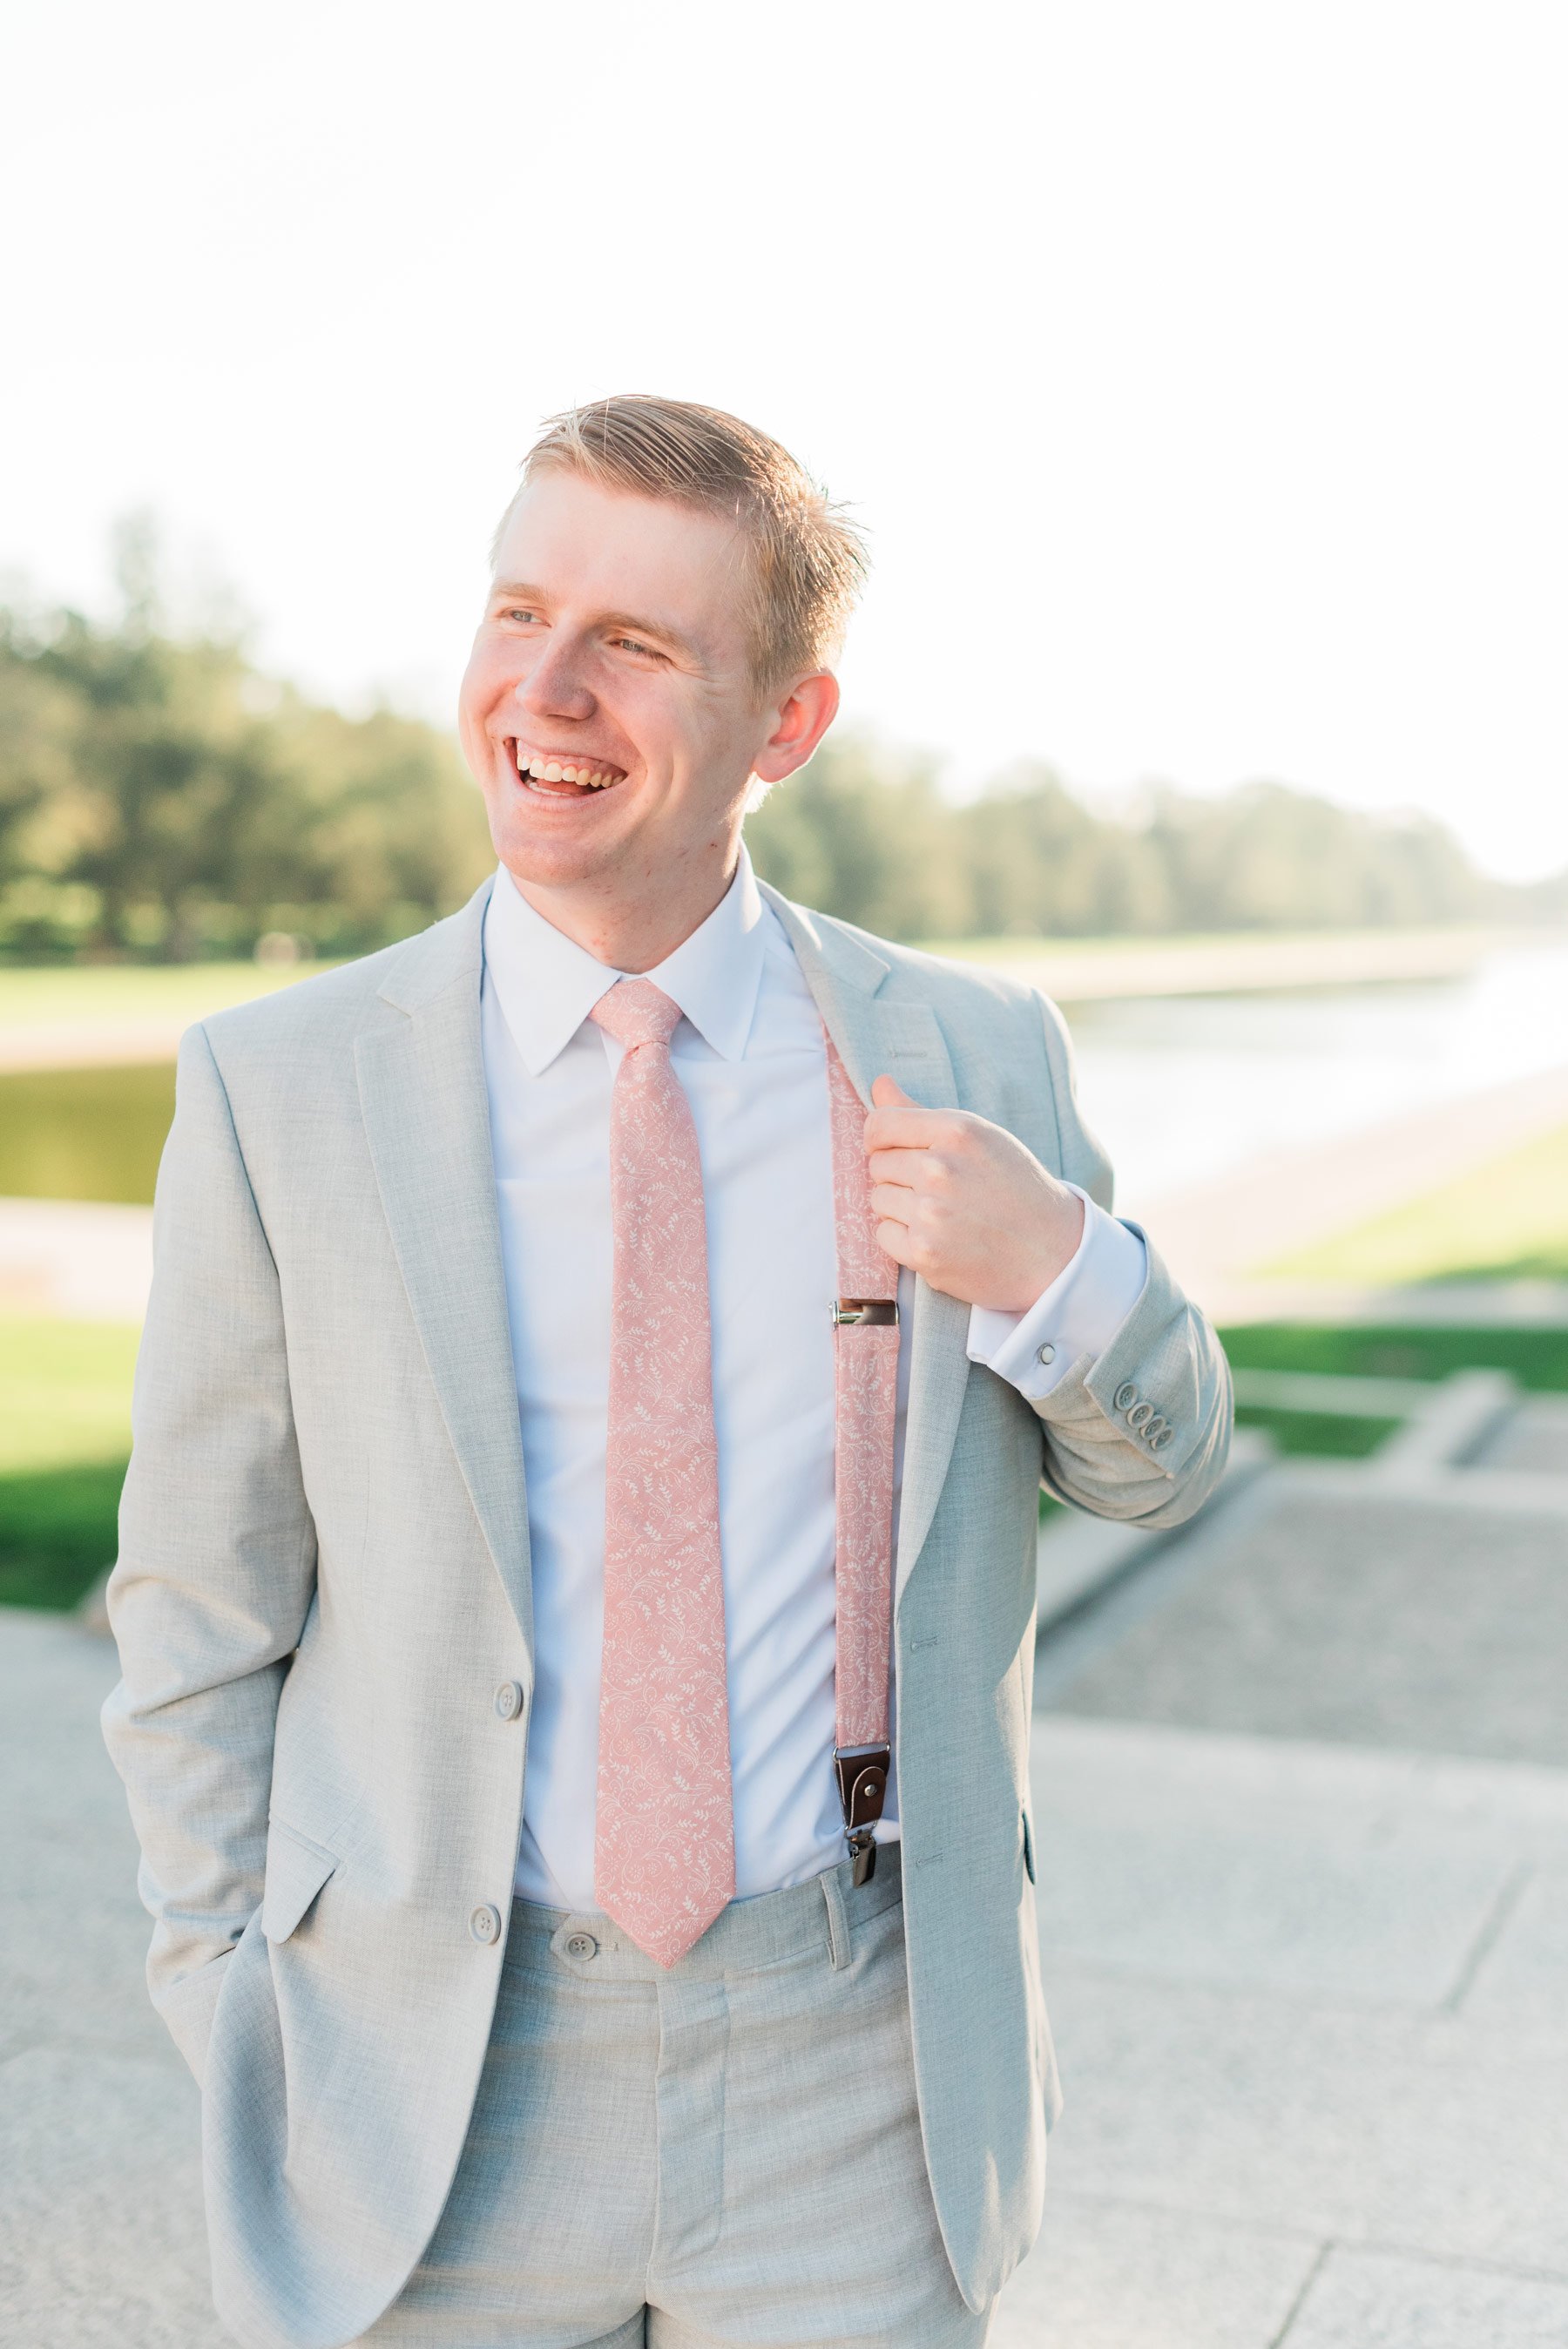    The details of the groom’s outfit are featured in this men’s wedding suit shot. #washingtondcphotography #washingtondctemple #washingtondcwedding #dcweddingphotographer #washingtondctemplewedding #eastcoastweddingphotographer #sunsetbridals #modes